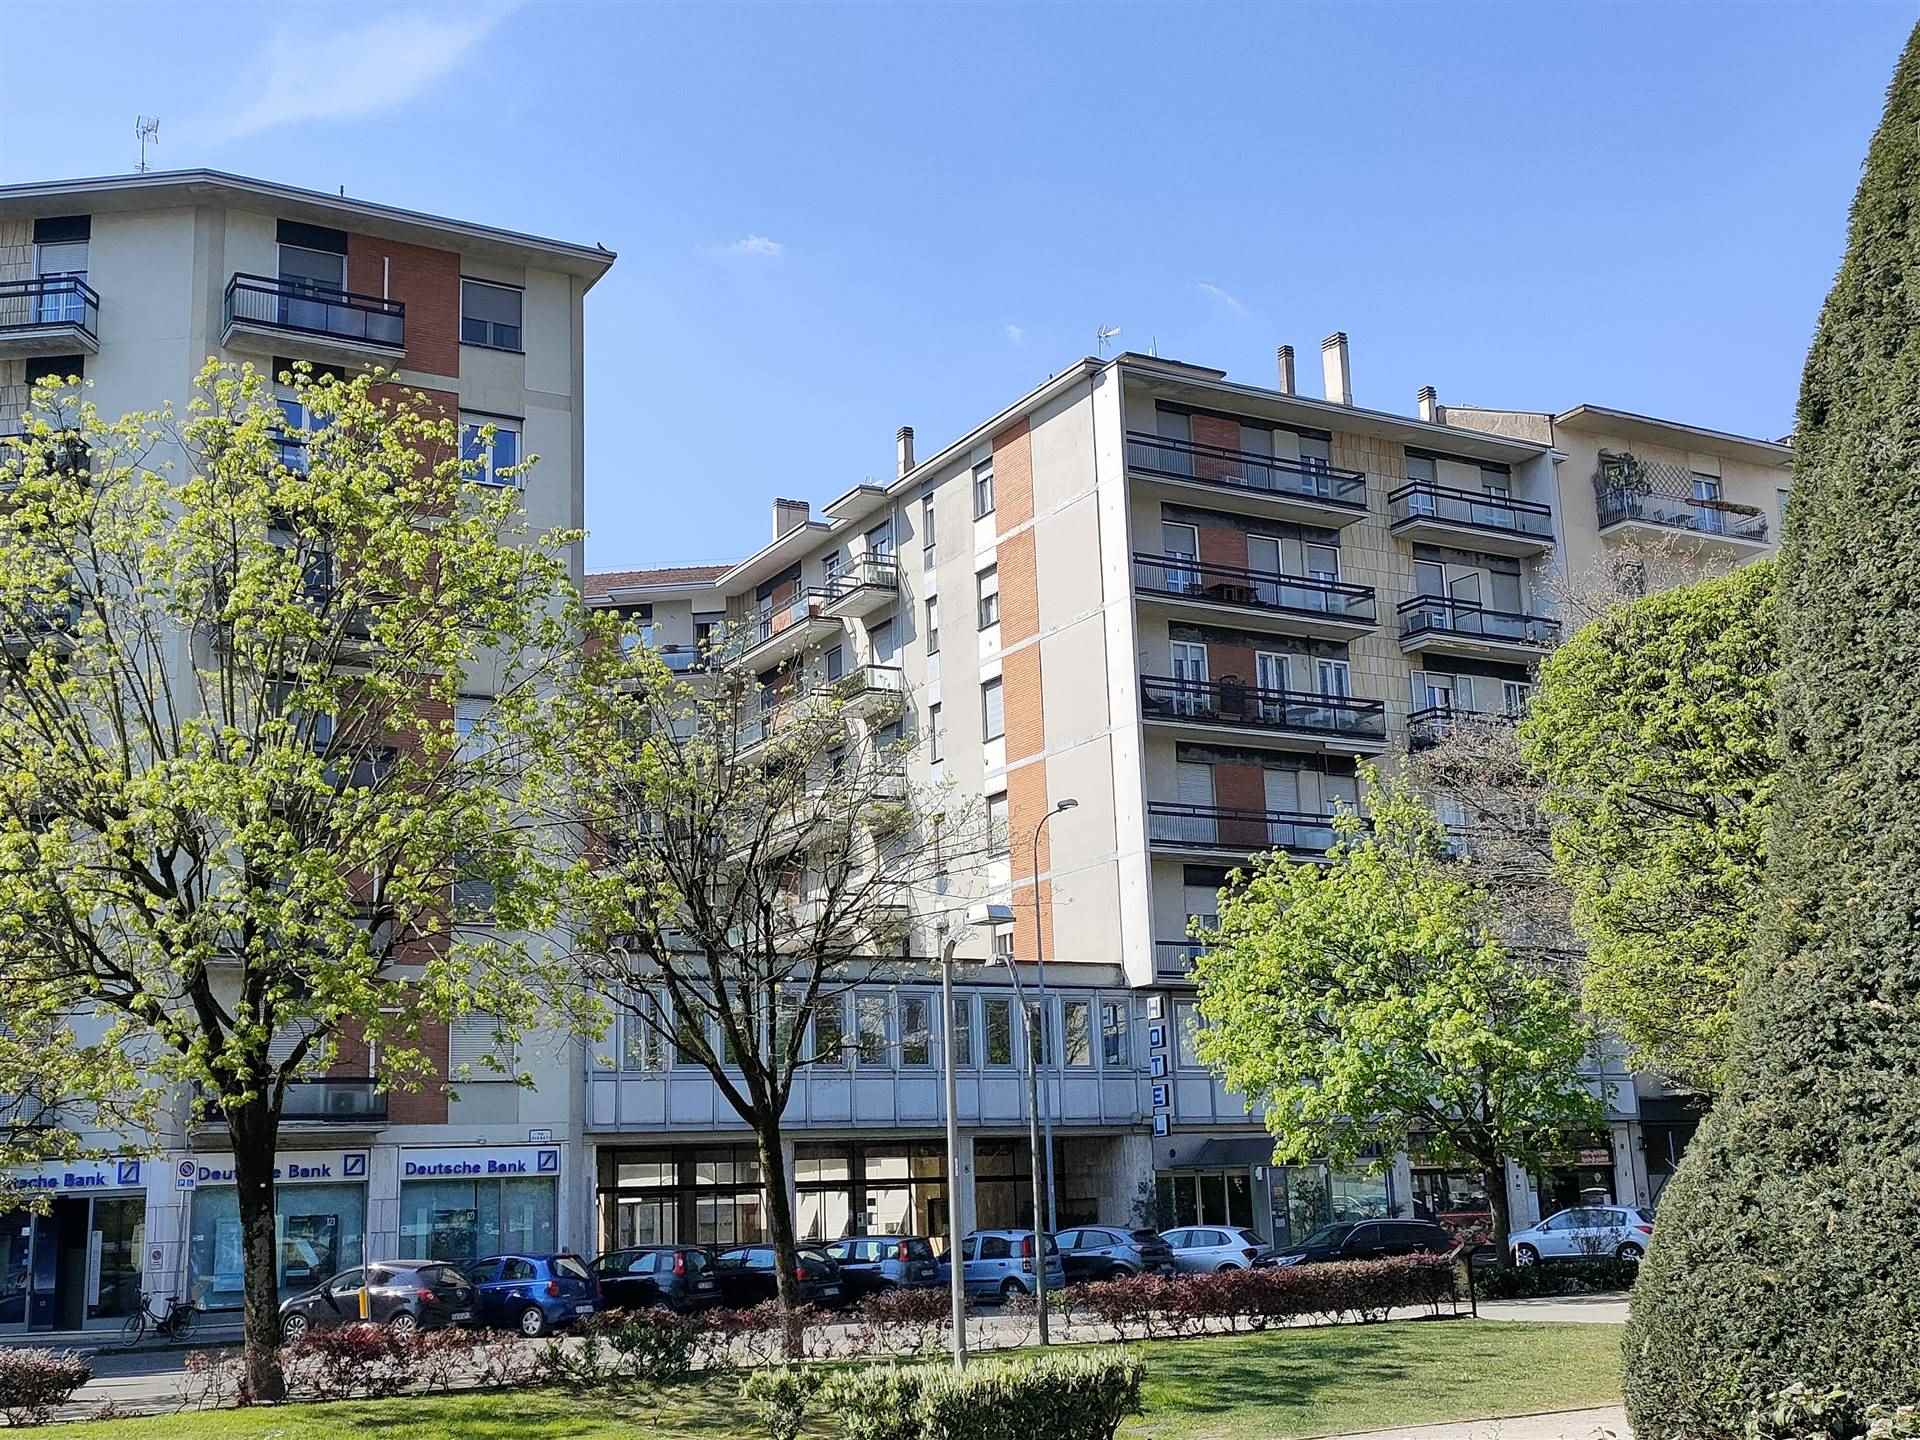 LODICITTA, LODI, Apartment for sale of 65 Sq. mt., Heating Individual heating system, Energetic class: F, placed at 3° on 6, composed by: 2 Rooms, 1 